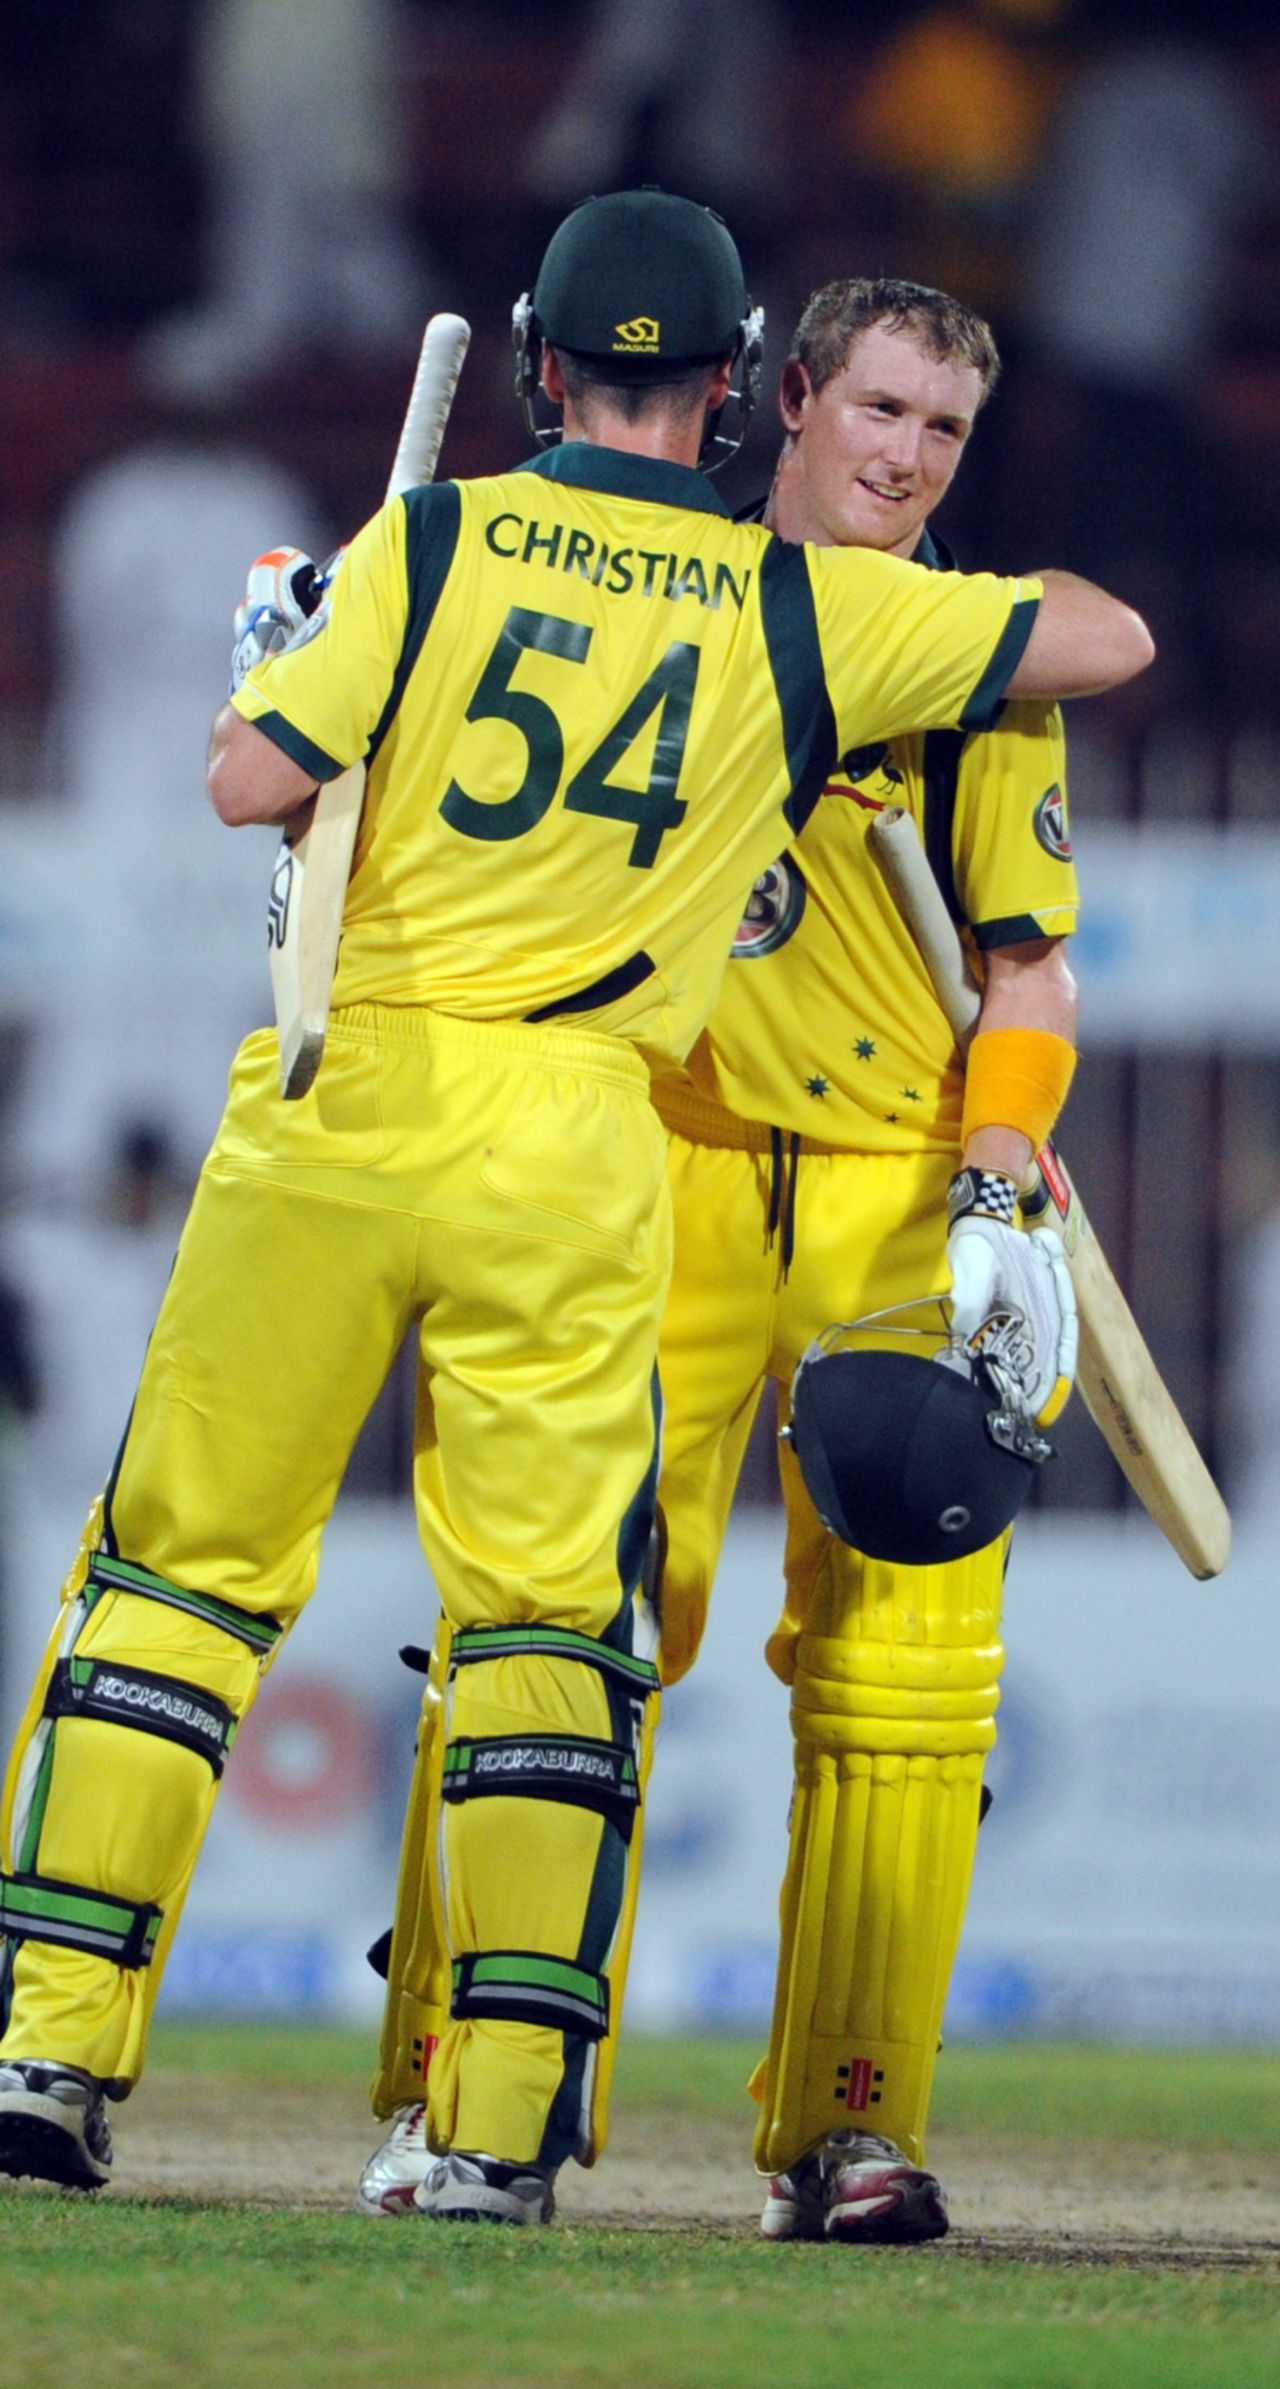 Daniel Christian and George Bailey celebrate after securing the win, Pakistan v Australia, 1st ODI, Sharjah, August 28, 2012